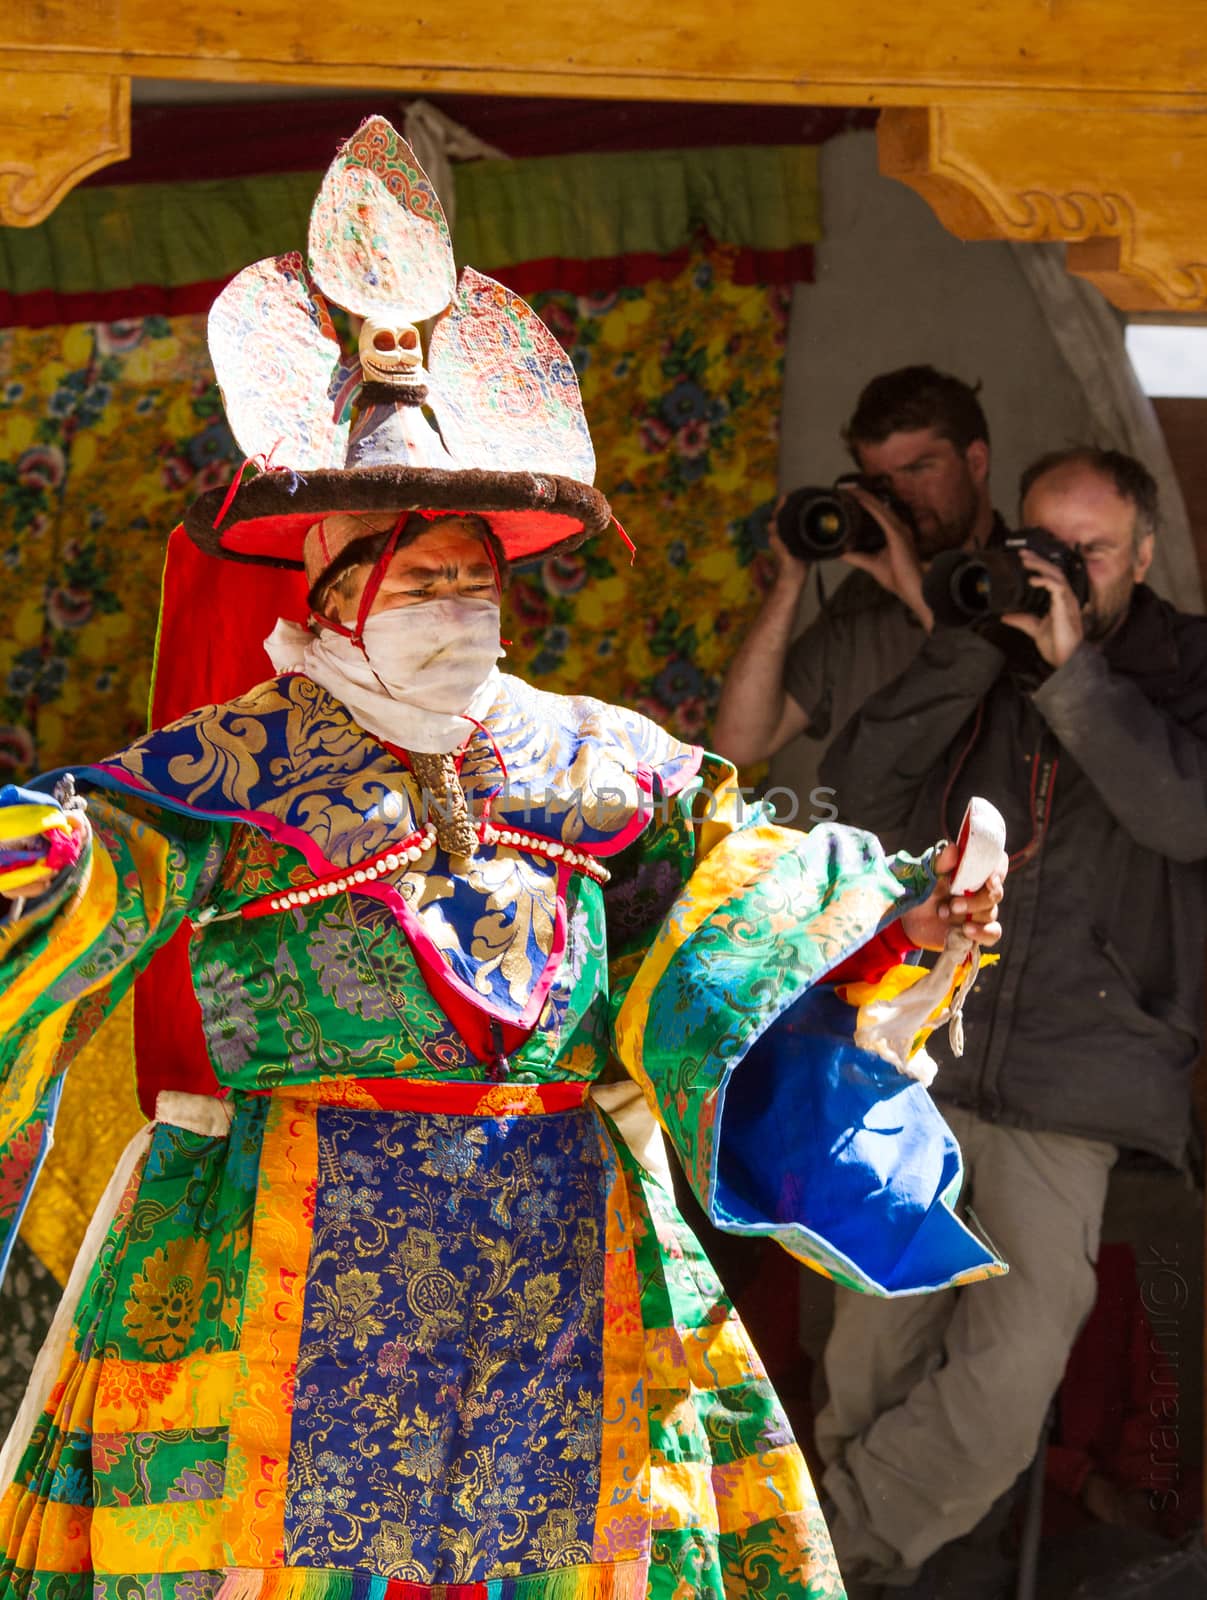 Kursha, India - July 17, 2012: Lama performs a religious masked and costumed mystery black hat dance of Tibetan Buddhism during the Cham Dance Festival, with two photographers on the background in Kursha monastery, India.